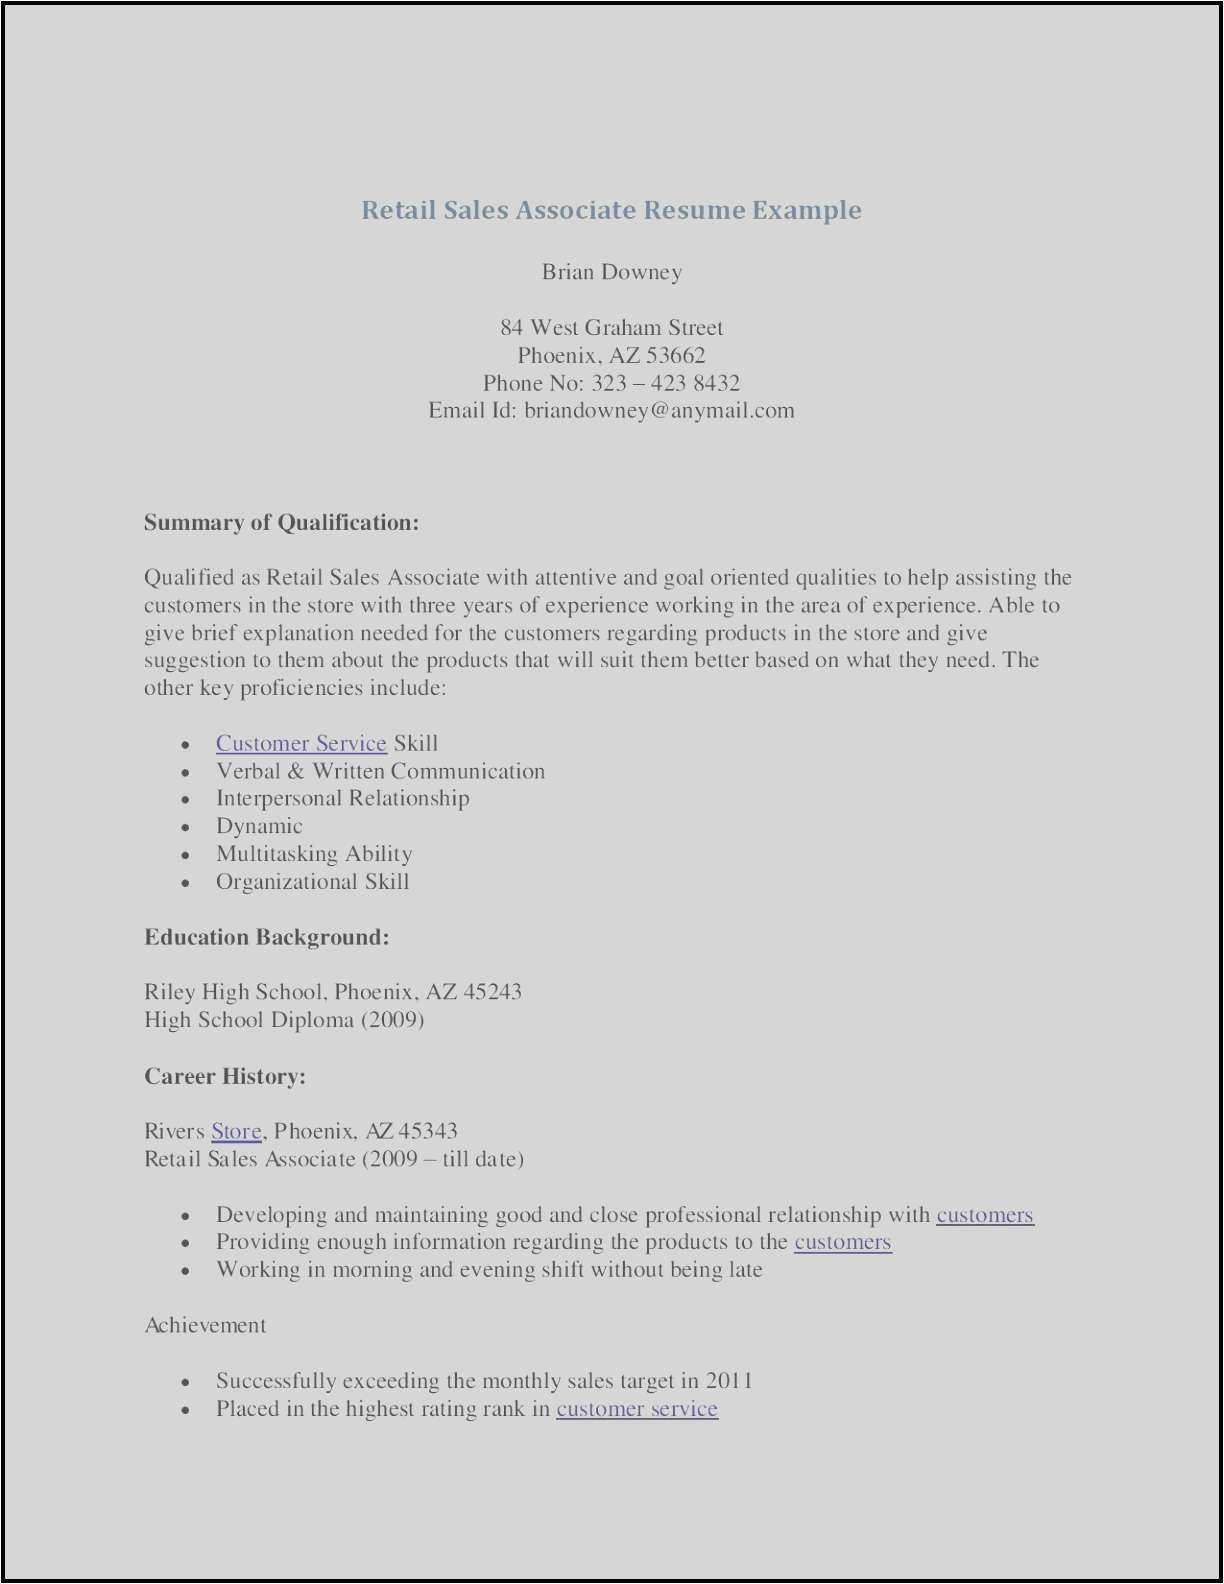 Sample Resume for Sales Clerk with No Experience 80 Awesome S Sample Resume for Sales Clerk without Experience